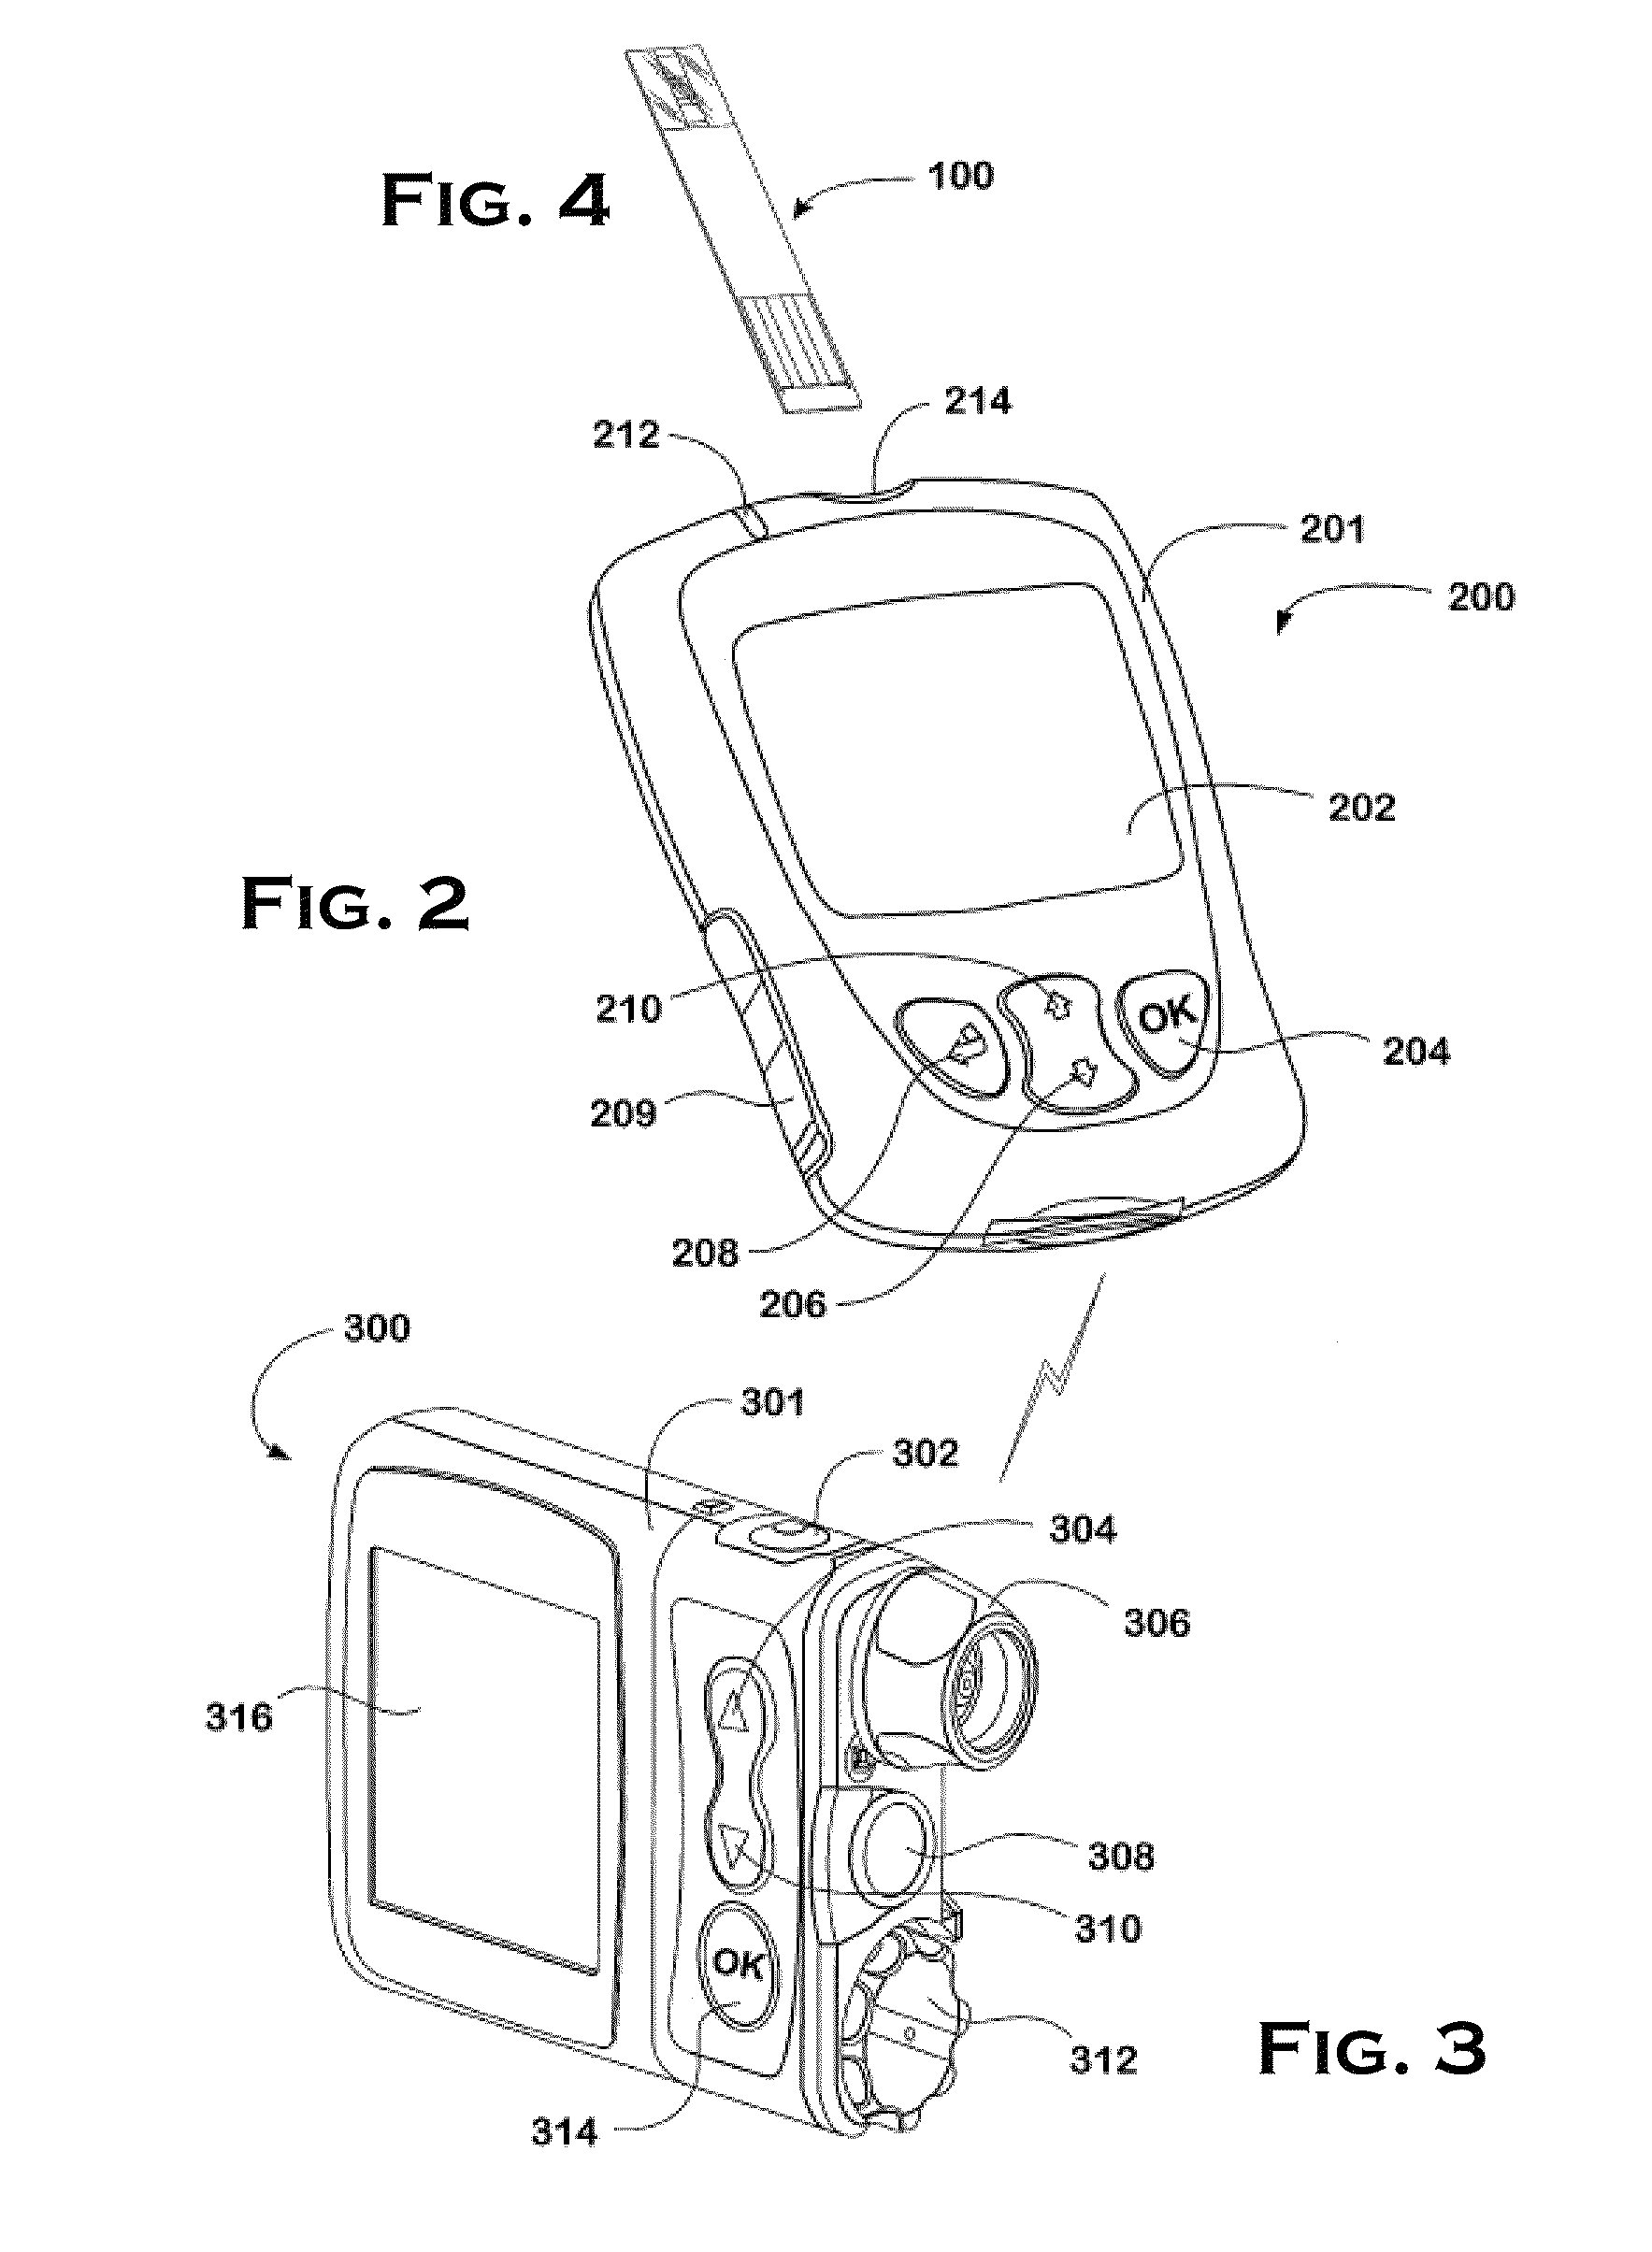 Methods for secure communication and pairing of a medical infusion device and a remote controller for such medical device